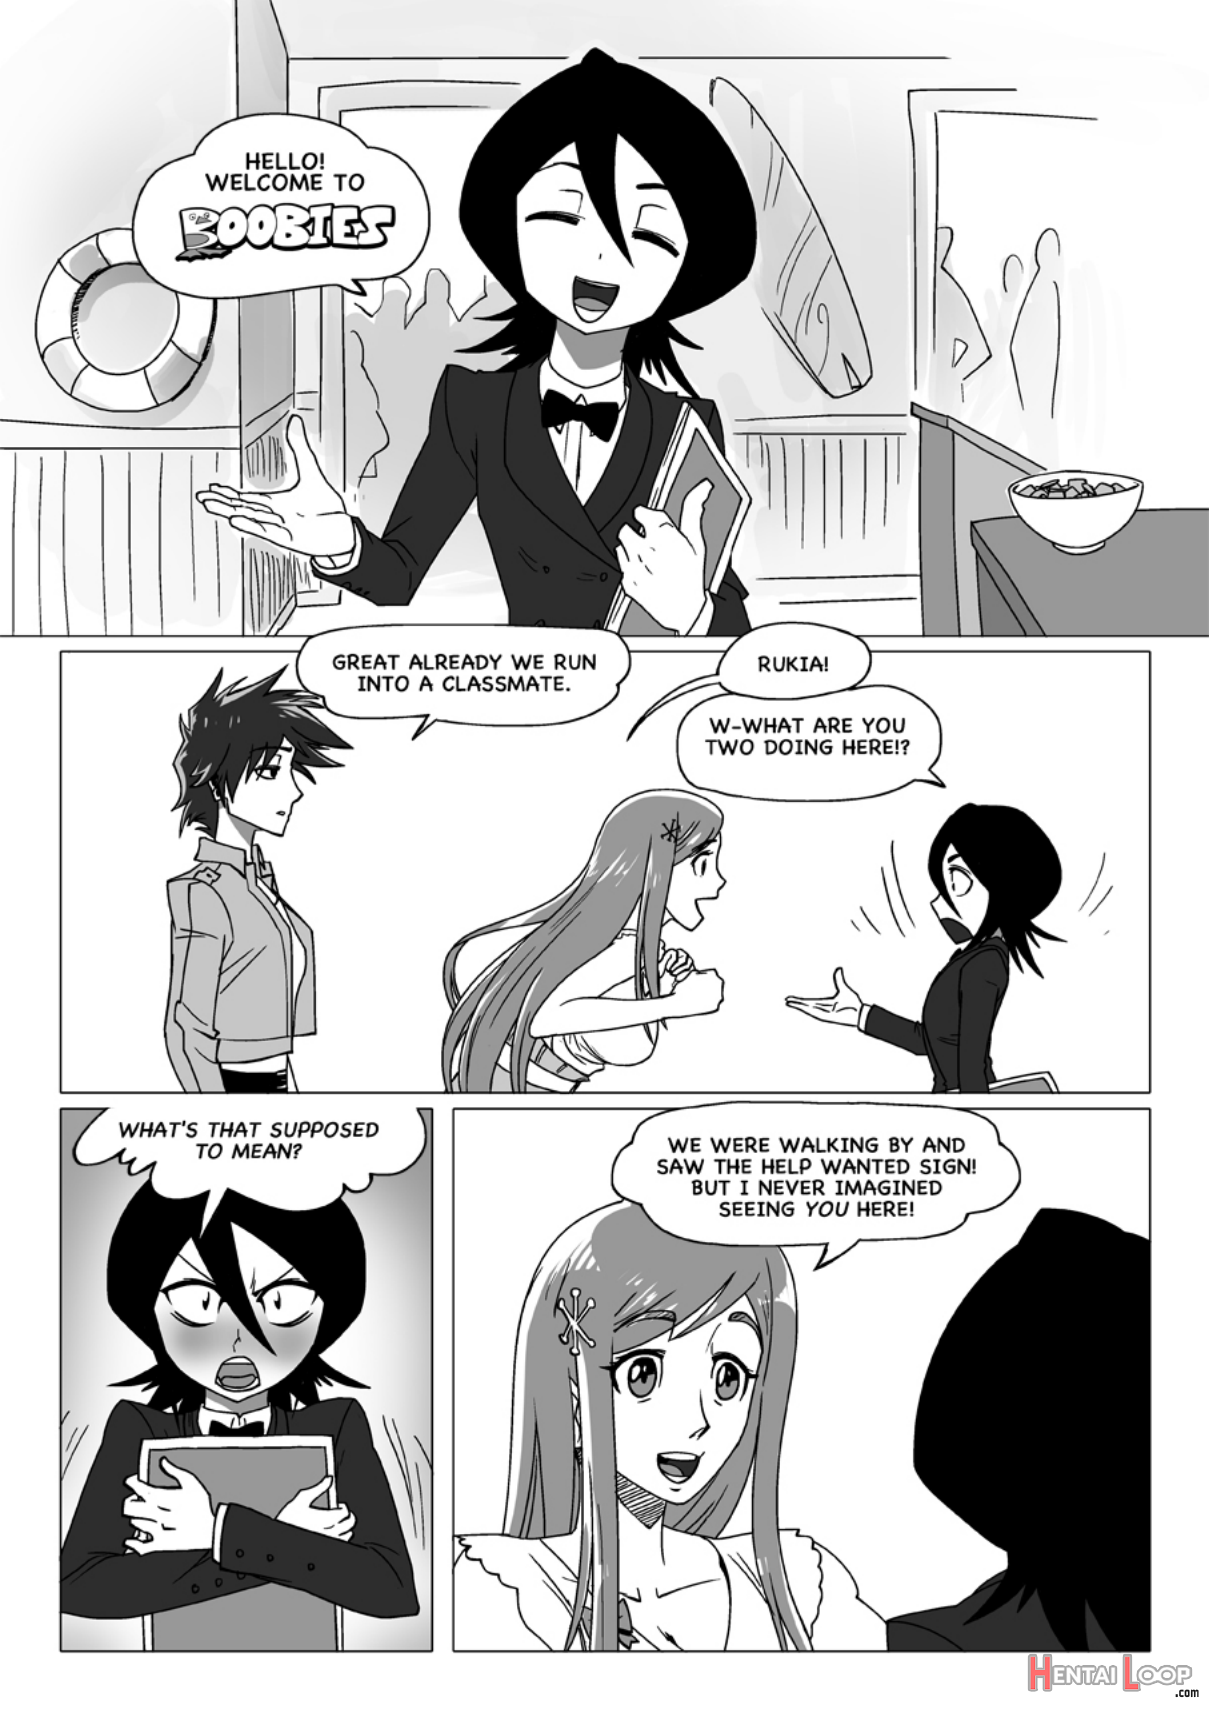 Happy To Serve You - Xxx Version page 35